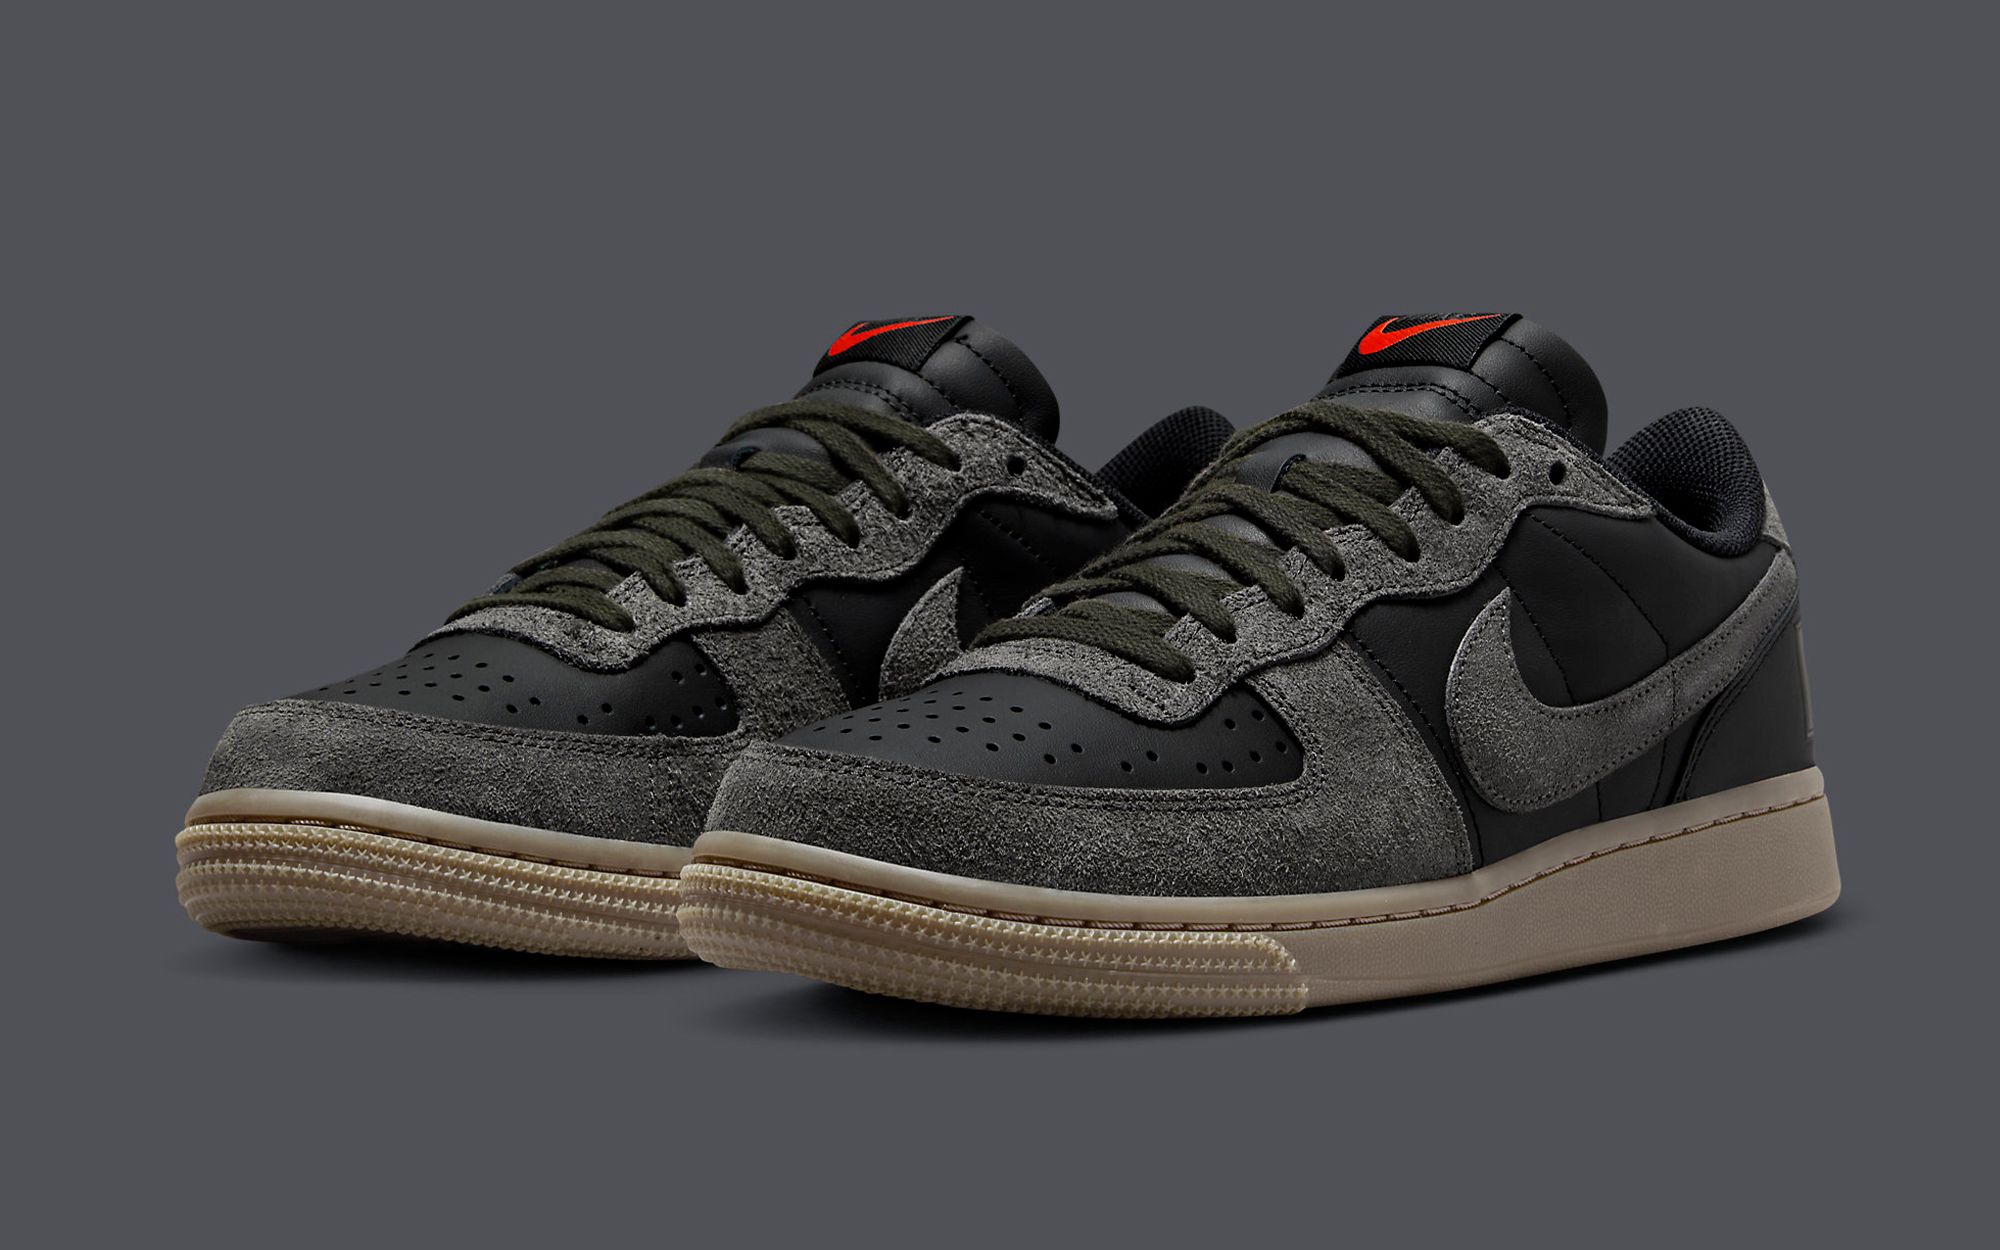 The Nike Terminator Low Surfaces in a Smokey Black and Medium Ash Color  Scheme